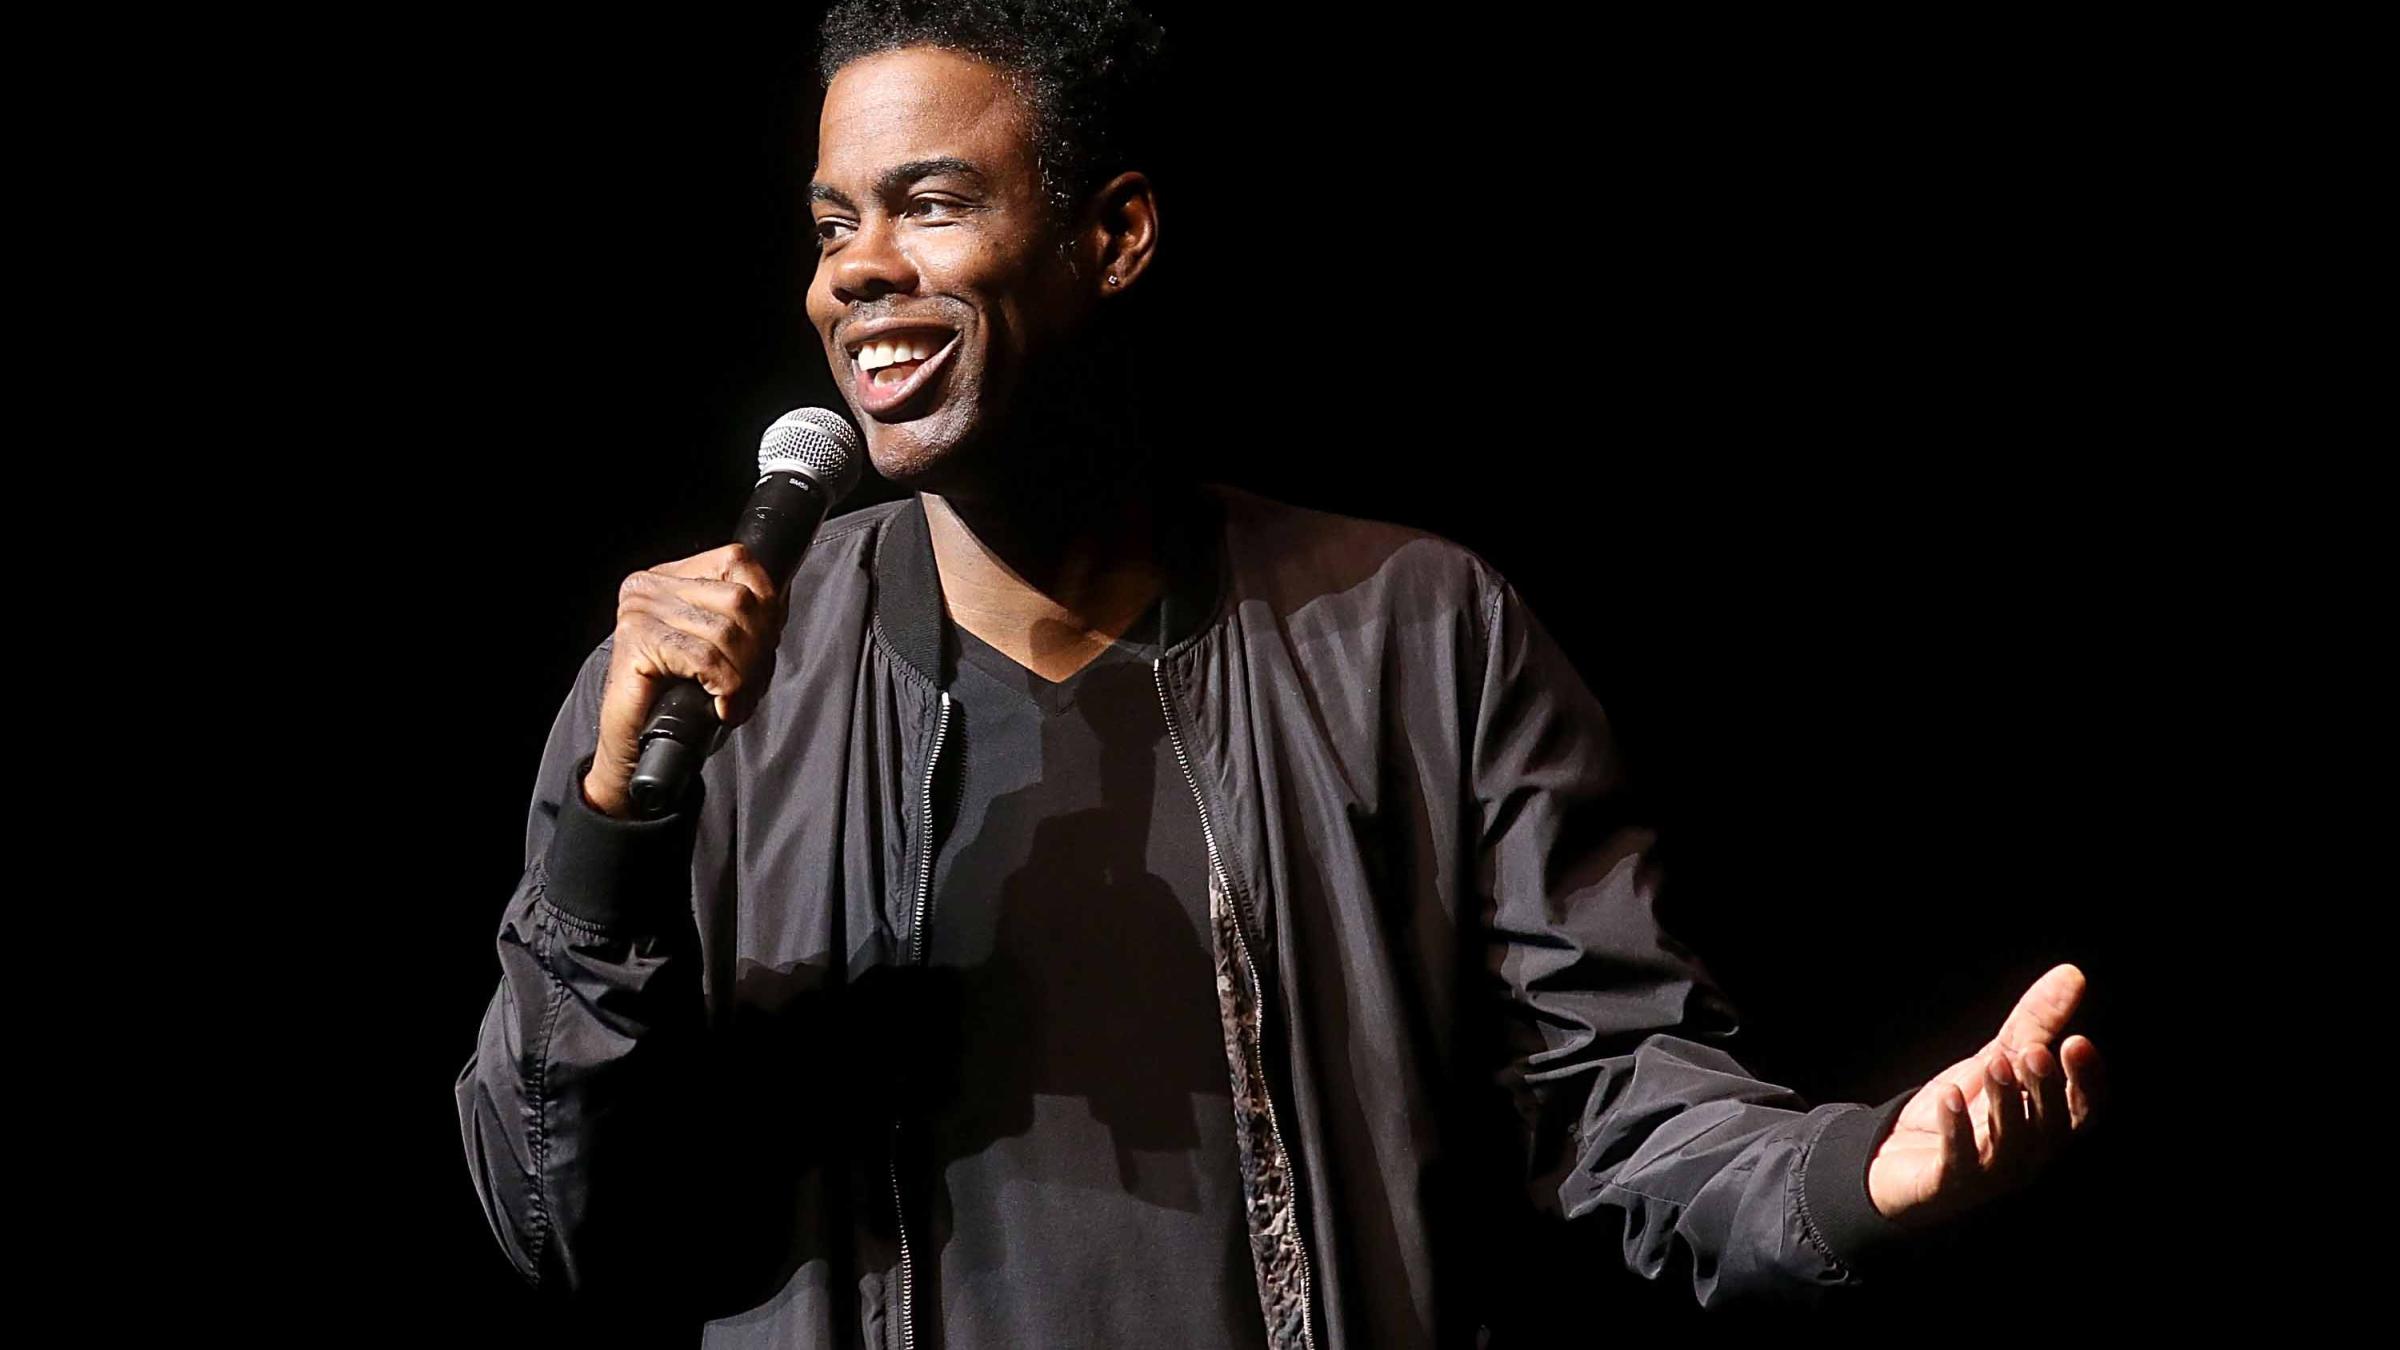 Chris Rock Performs StandUp For First Time Since Oscars Slap, Smith To